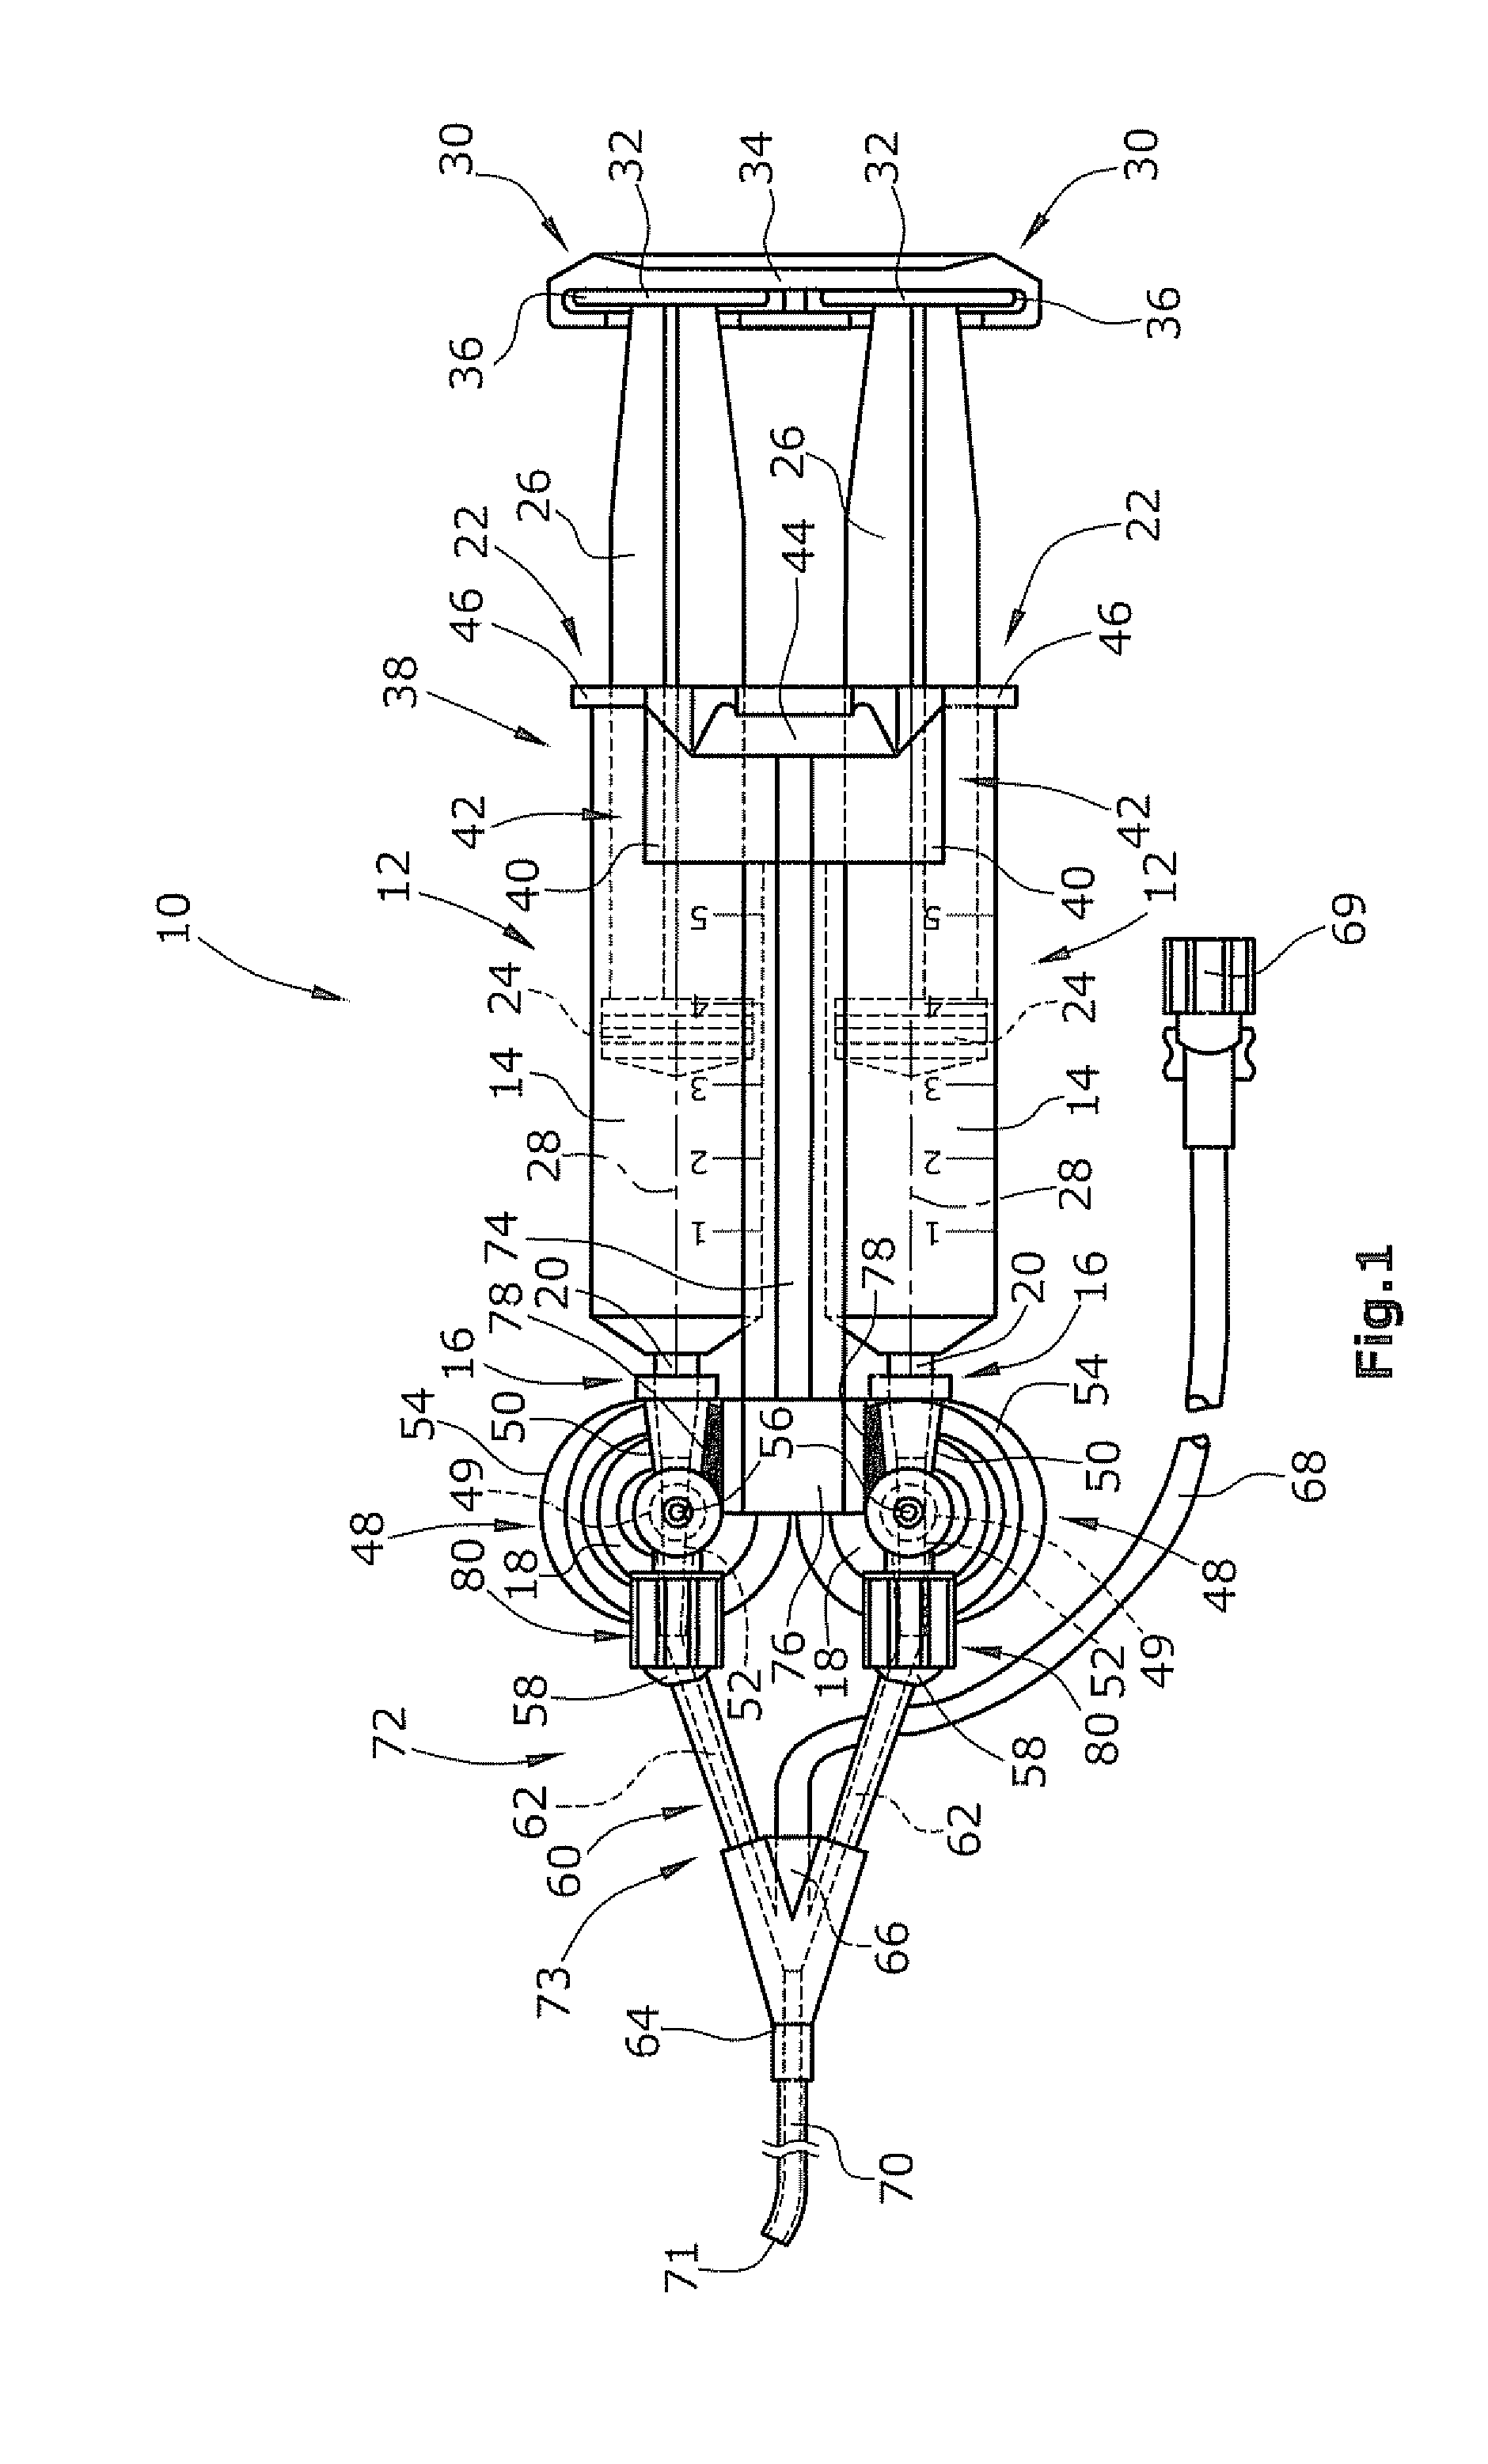 Applicator device for applying a multi-component fluid